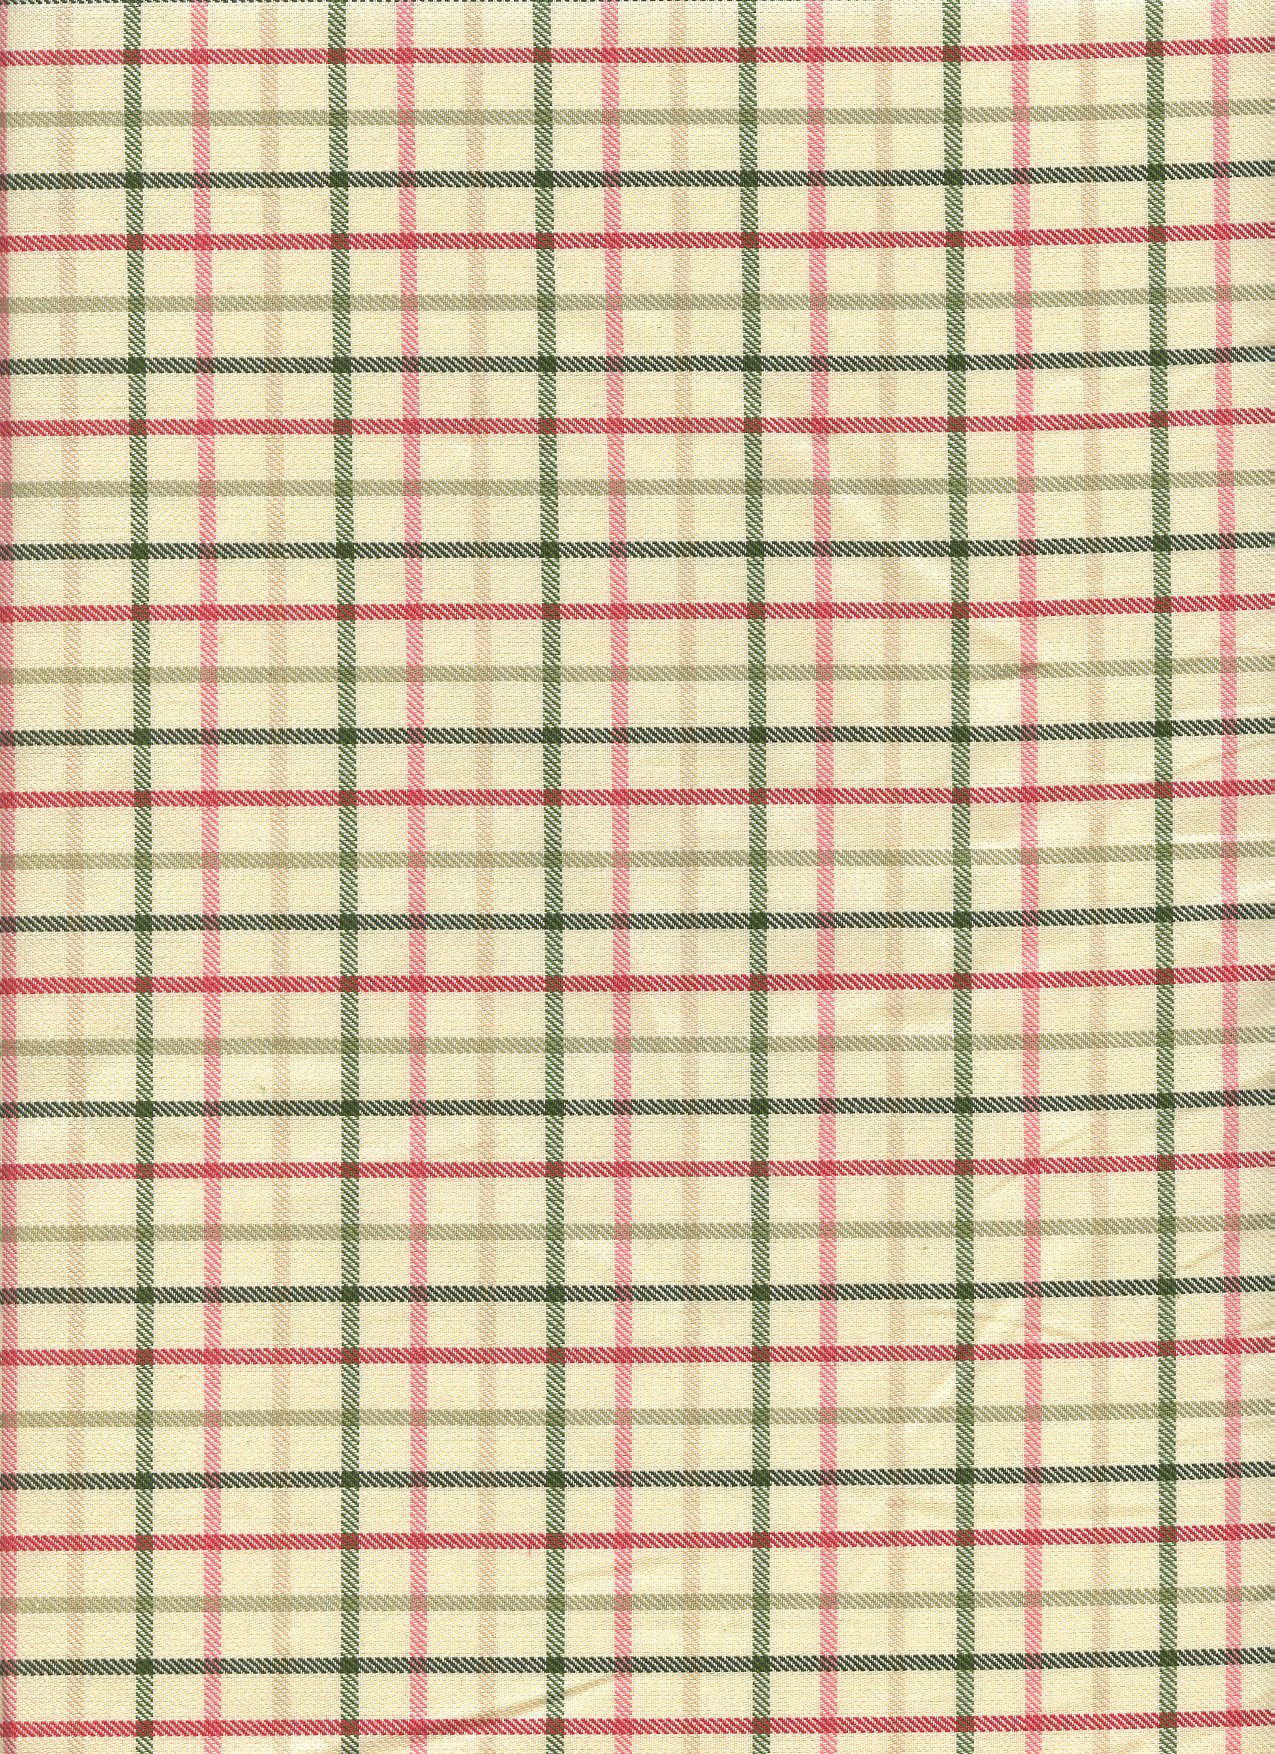 Spring Time Plaid in Pink and Green on Cream